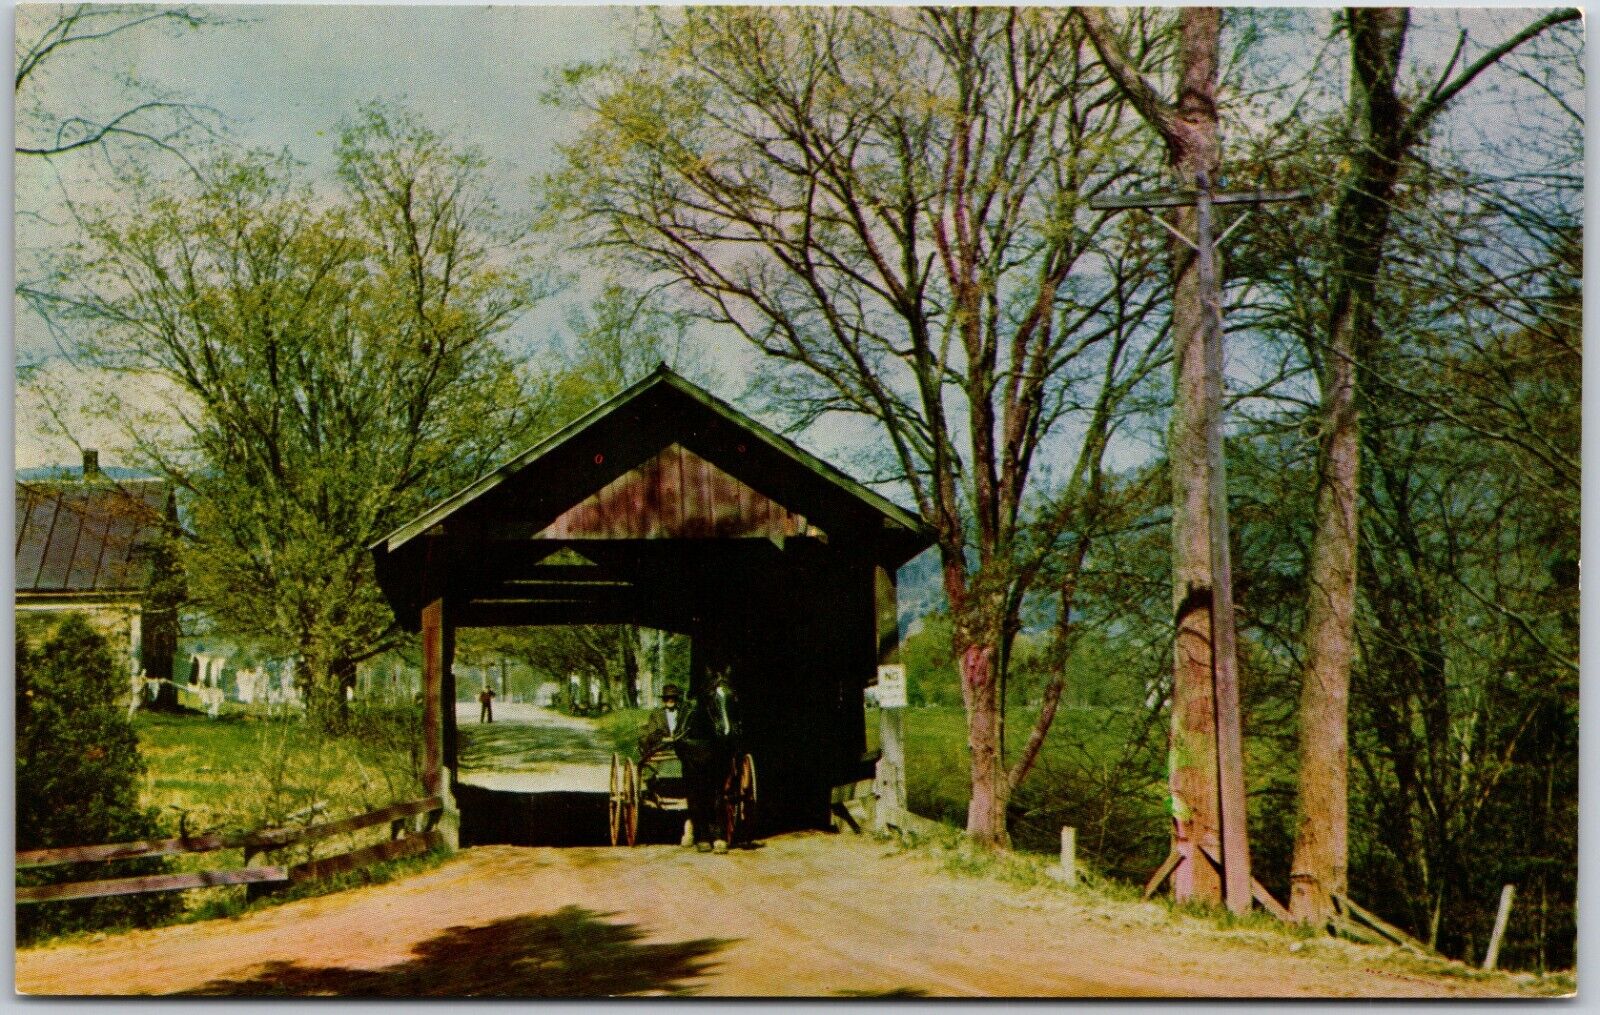 Waitsfield, Vermont, Covered Bridge, Horse & Buggy - Postcard